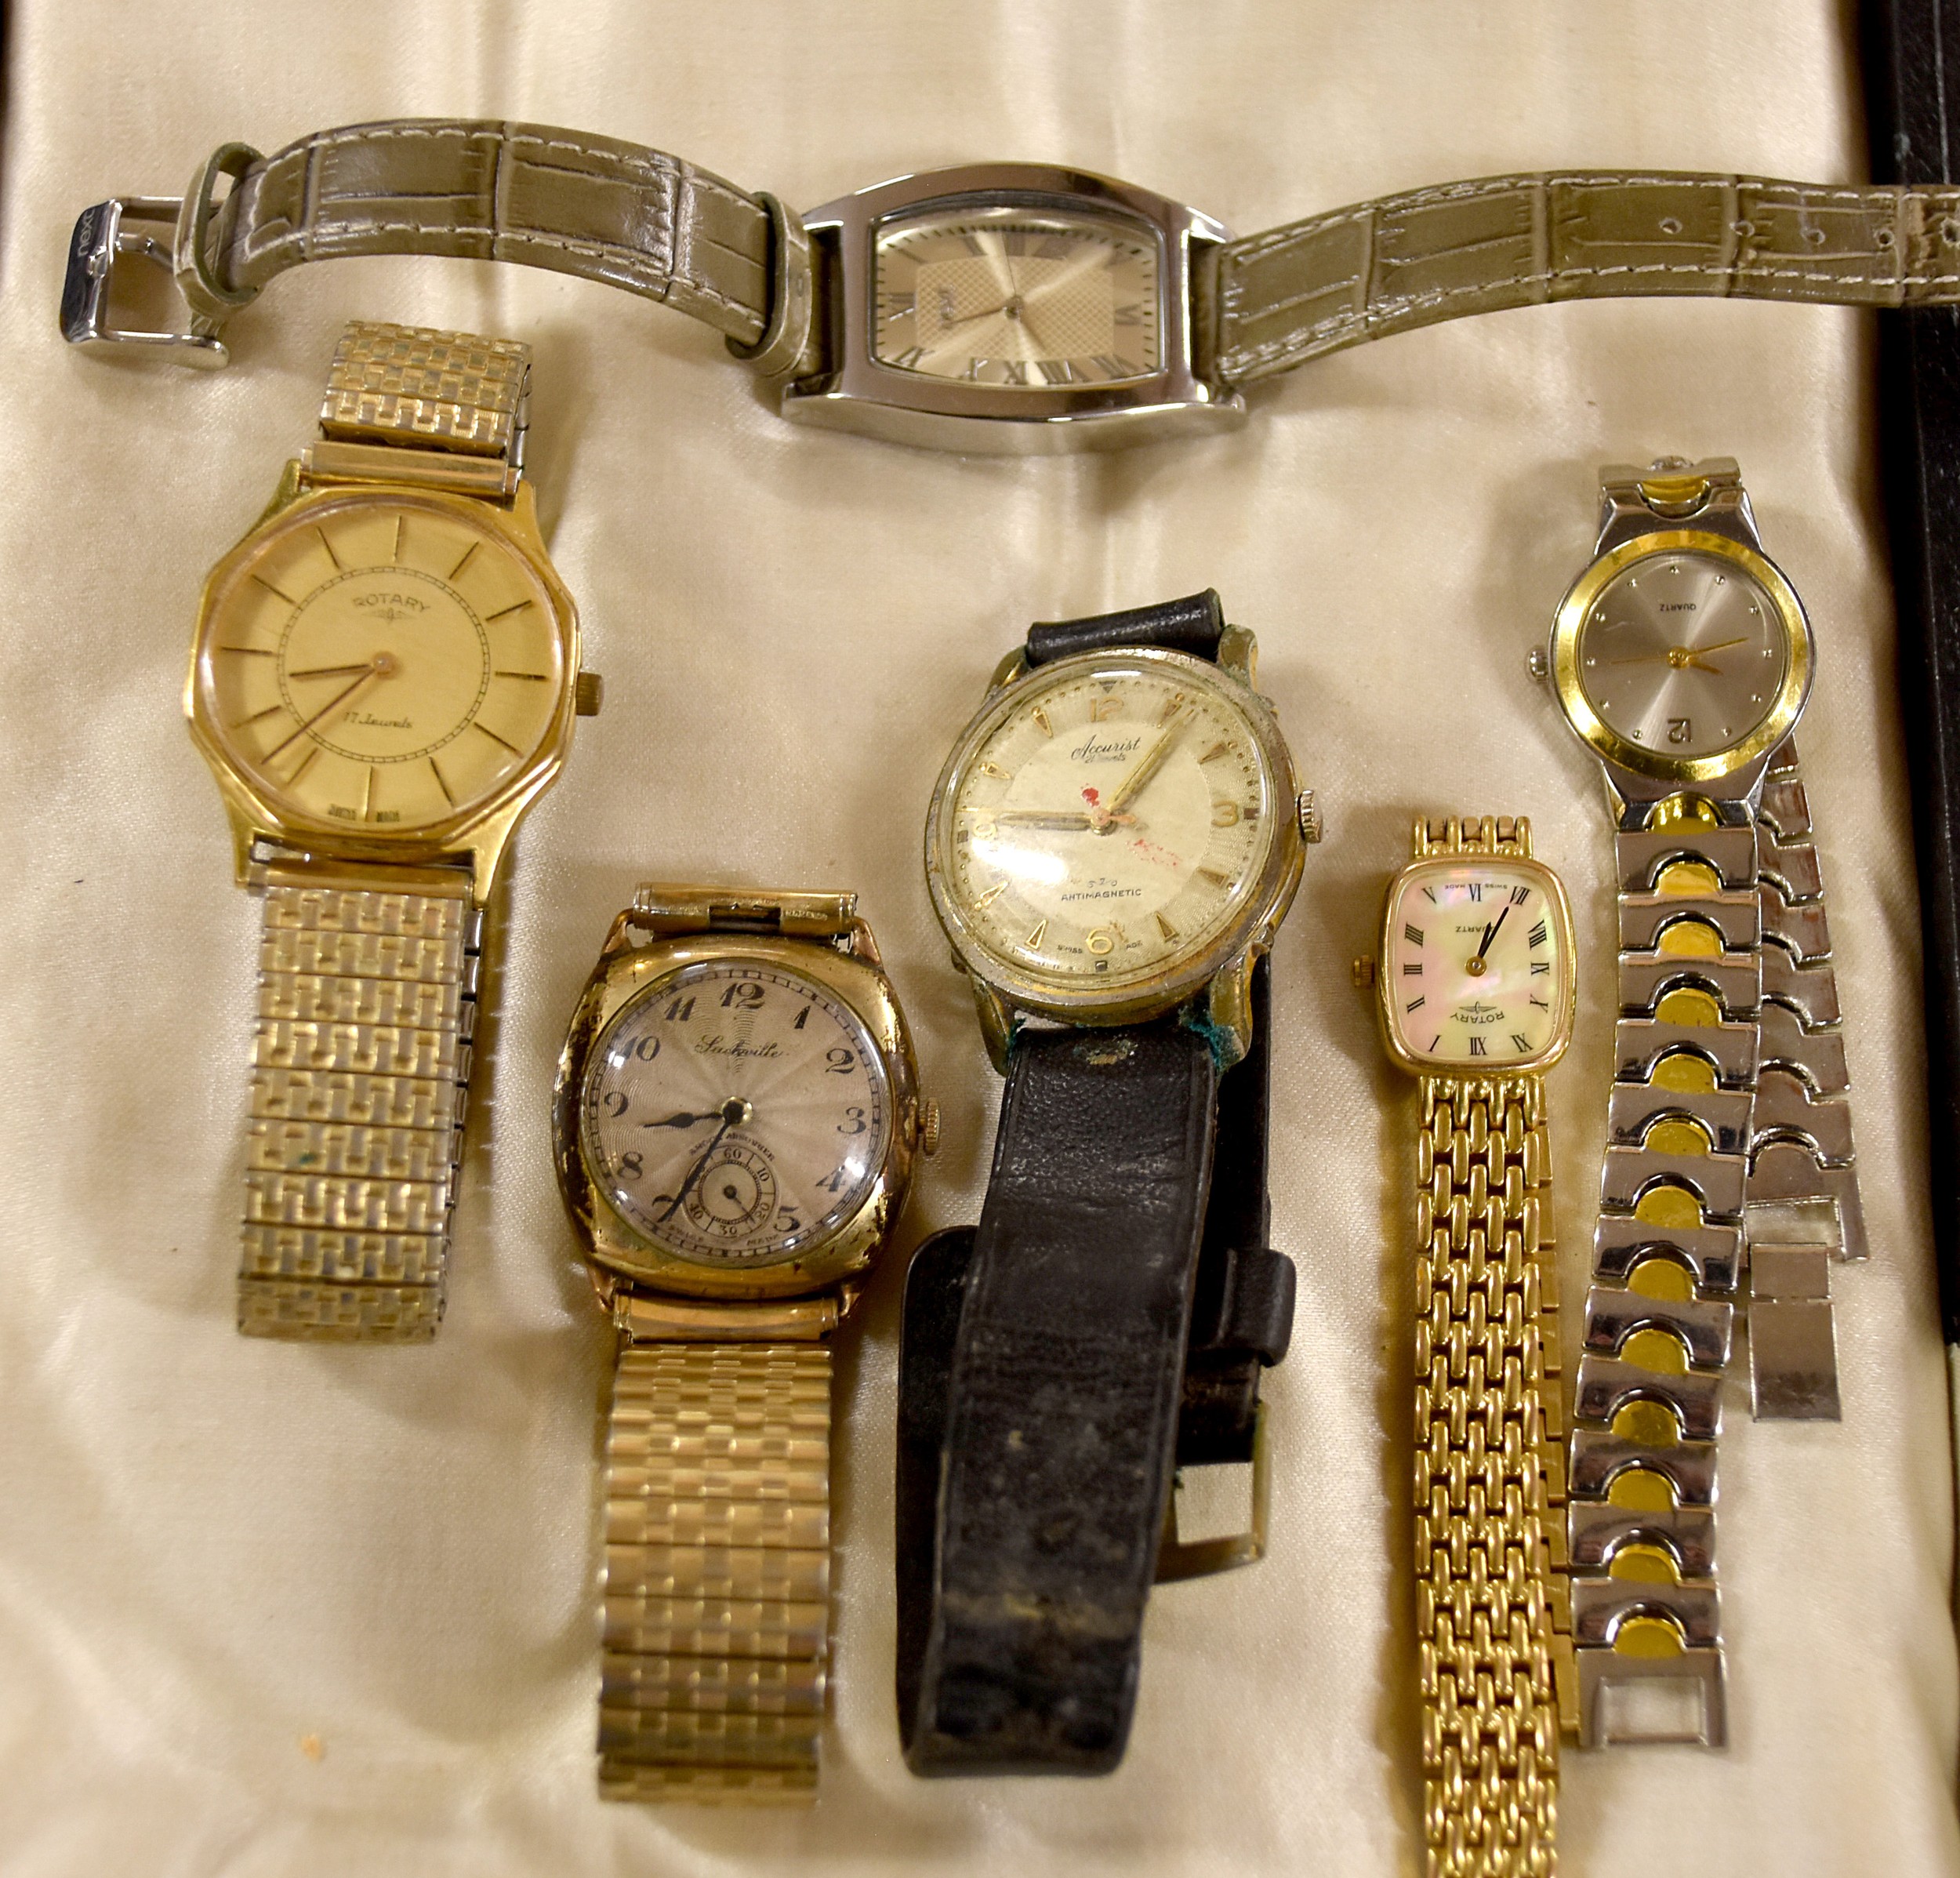 Box - Vintage Watches, Brooches, Costume Jewellery etc.